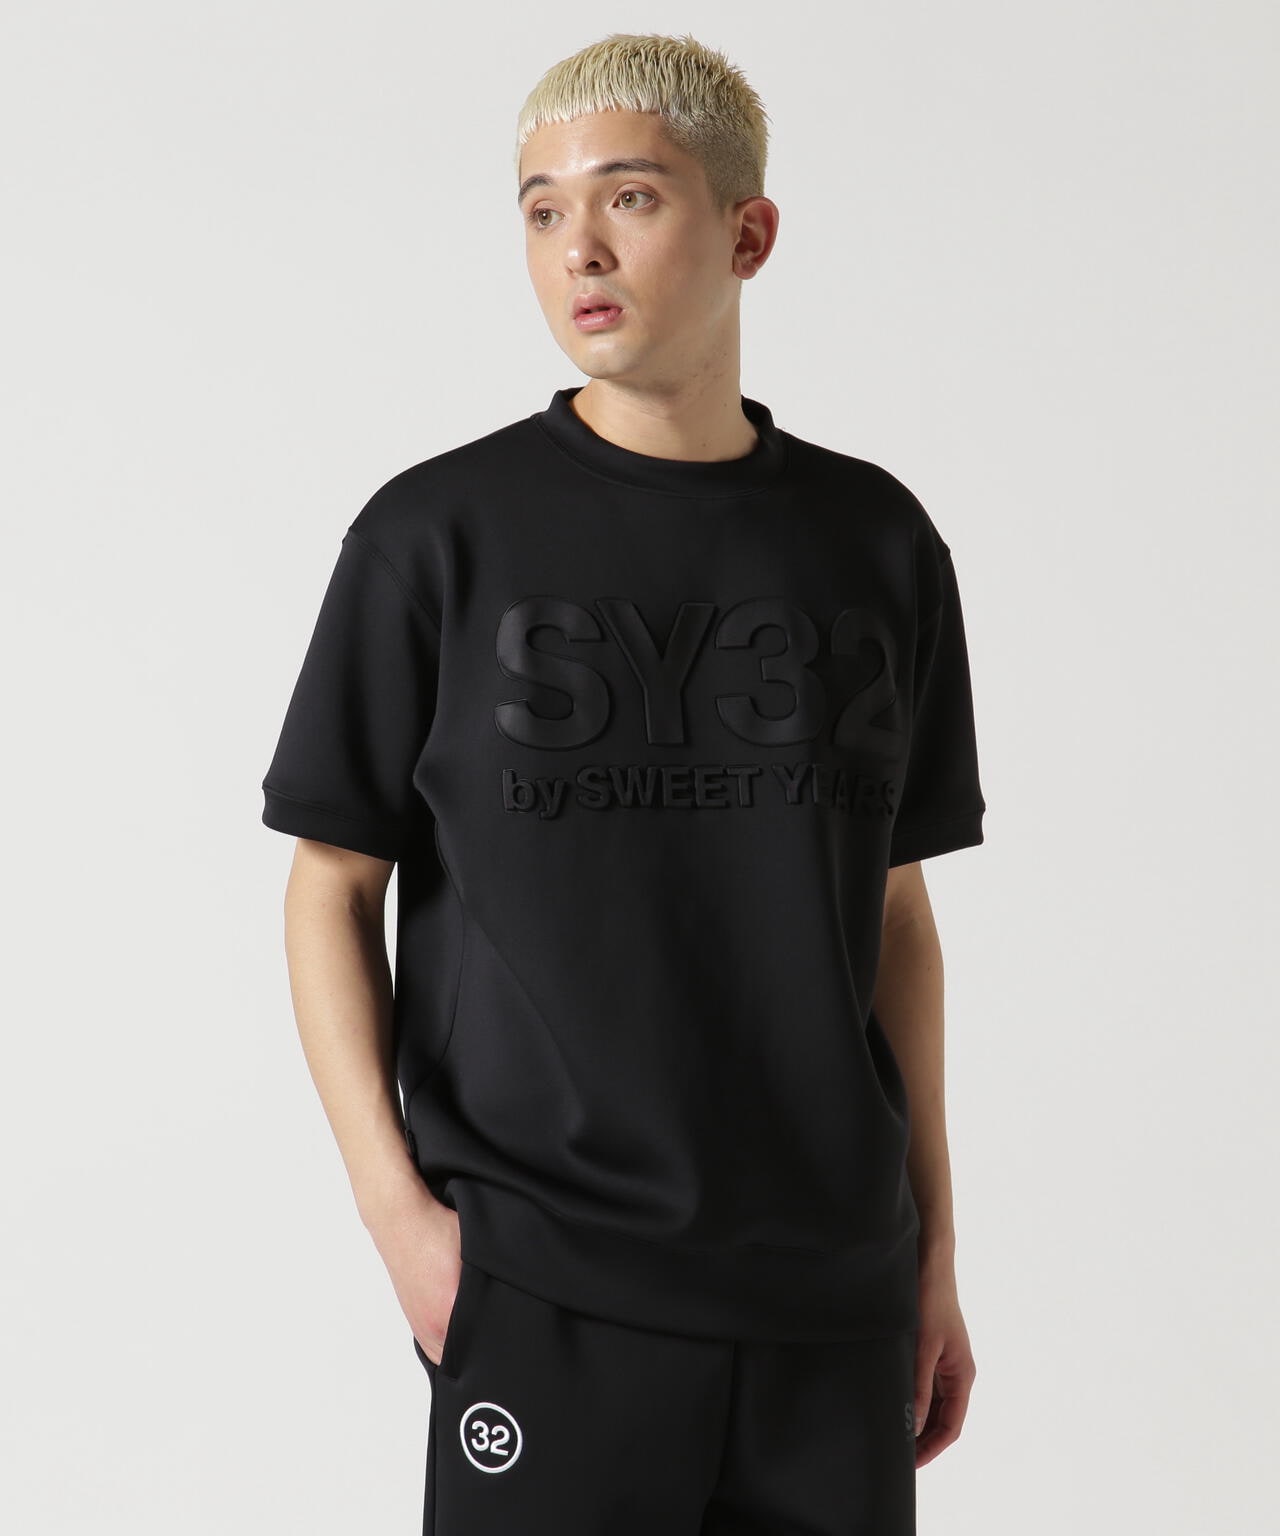 SY32 by SWEET YEARS/DOUBLE KNIT EMBOSS LOGO TEE | ROYAL FLASH ...